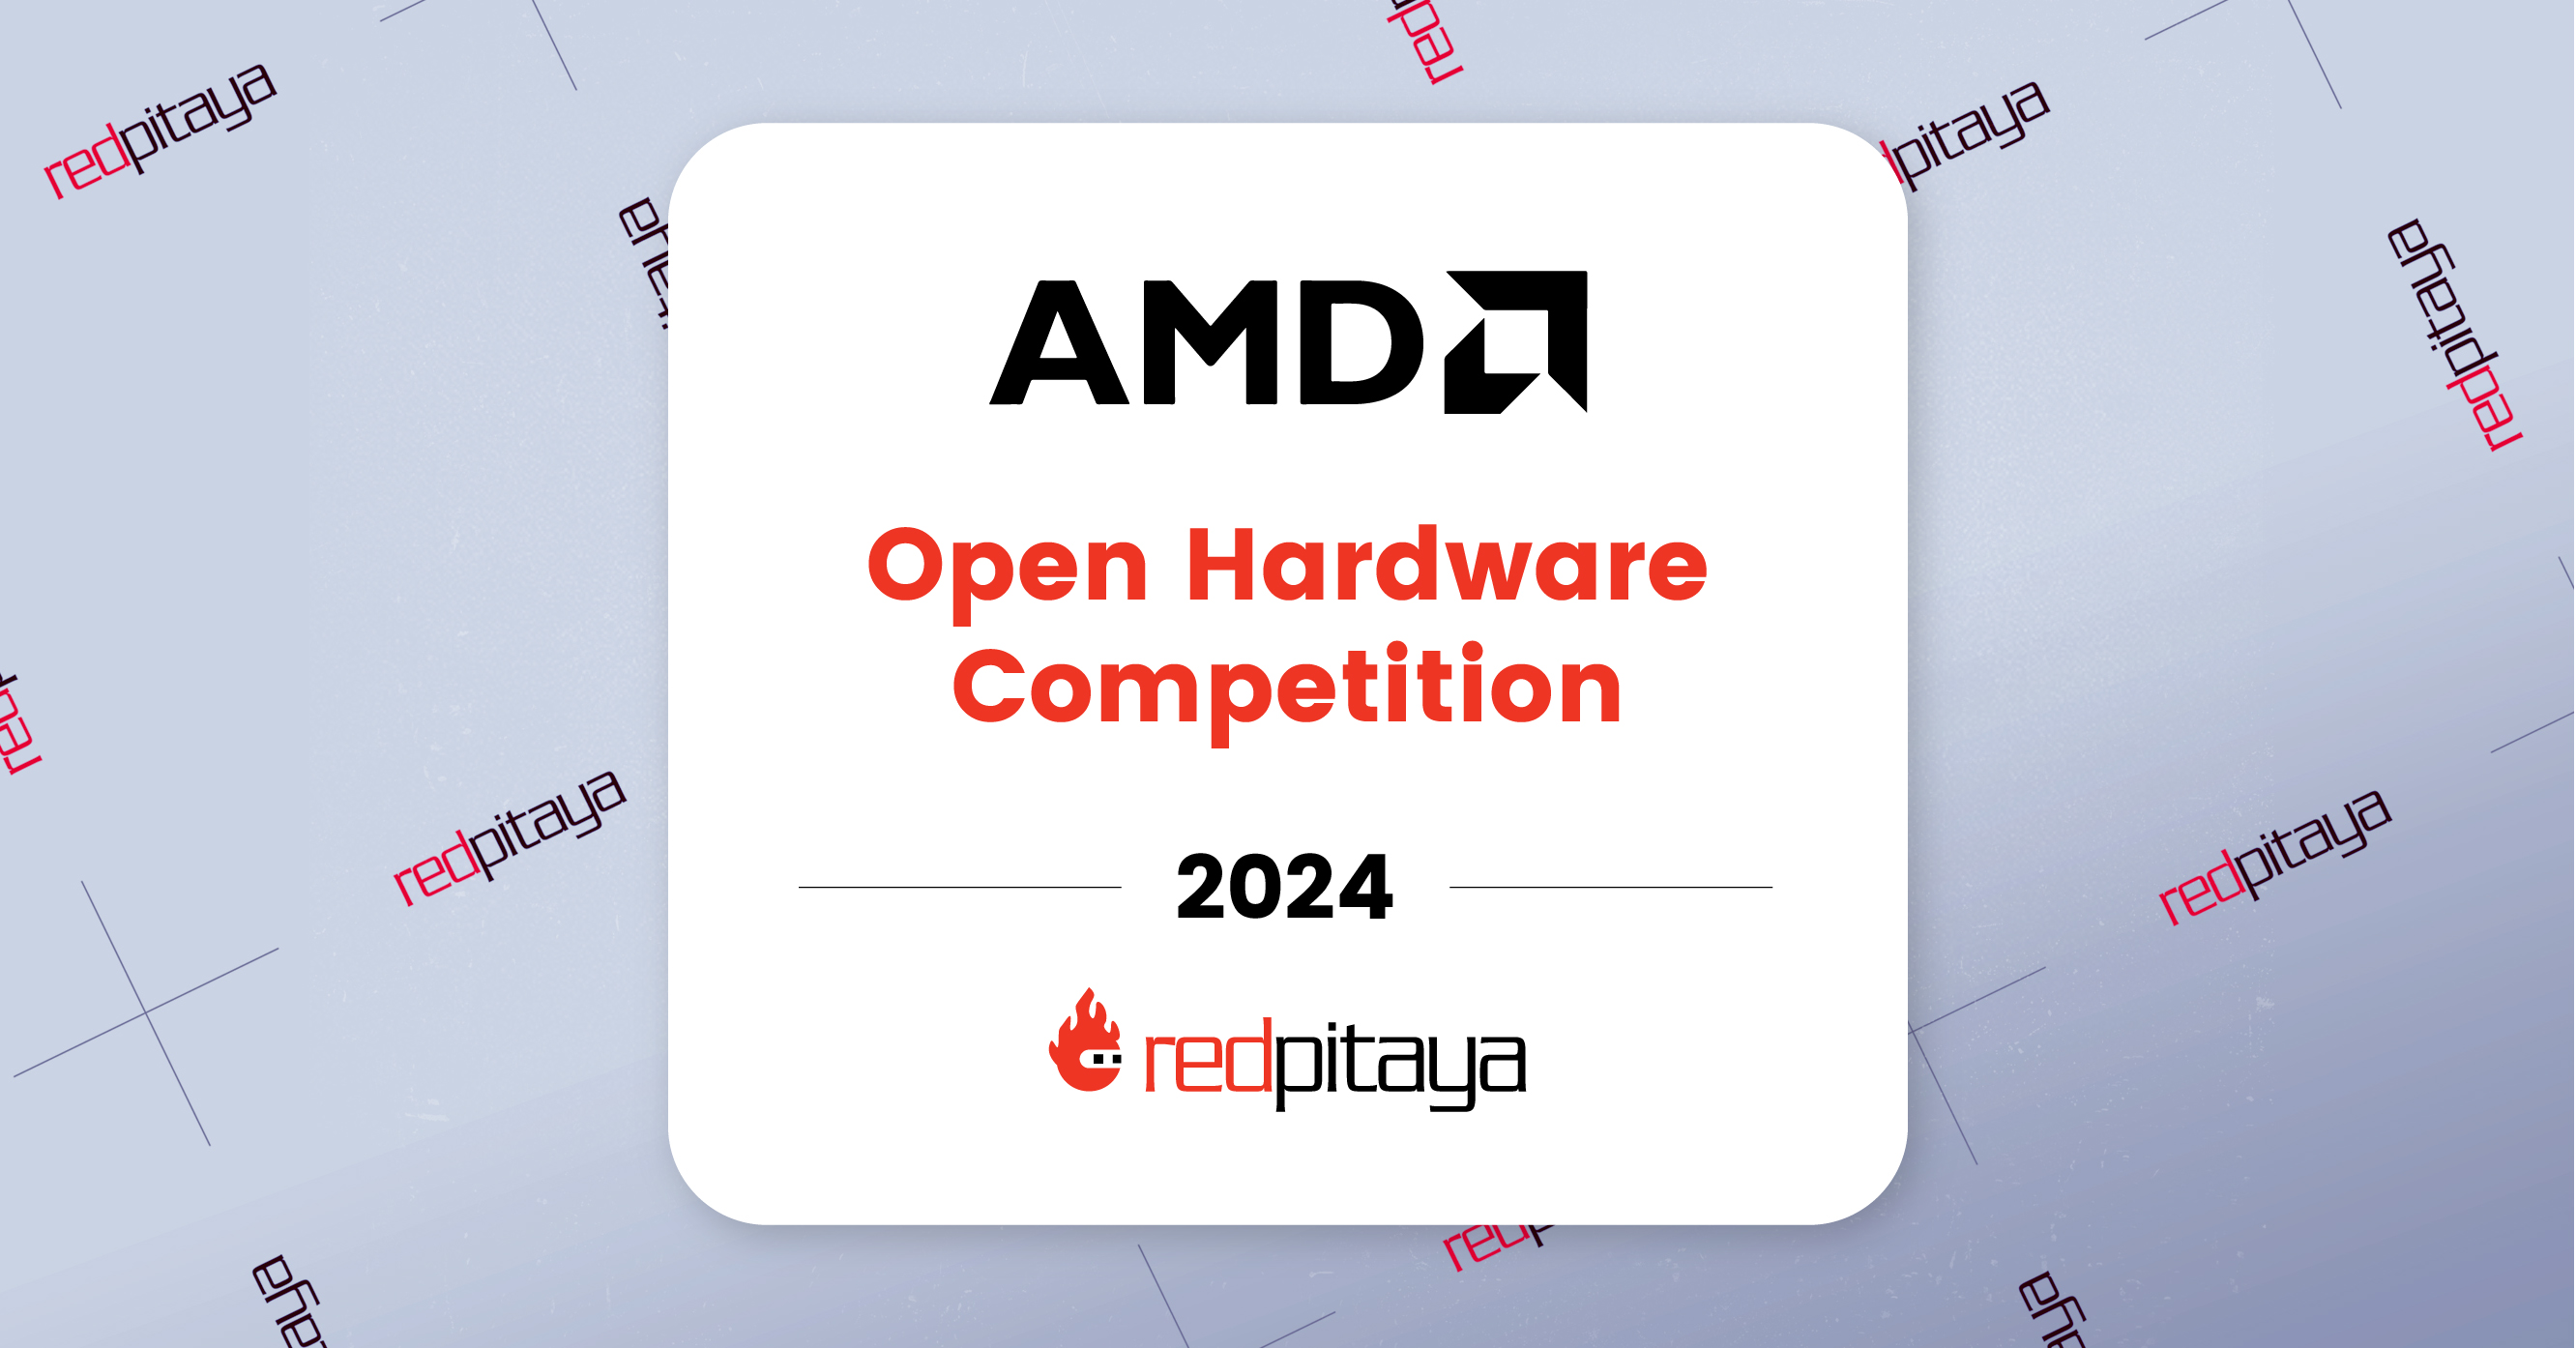 Unleash your creativity in the AMD Open Hardware Competition 2024 with Red Pitaya